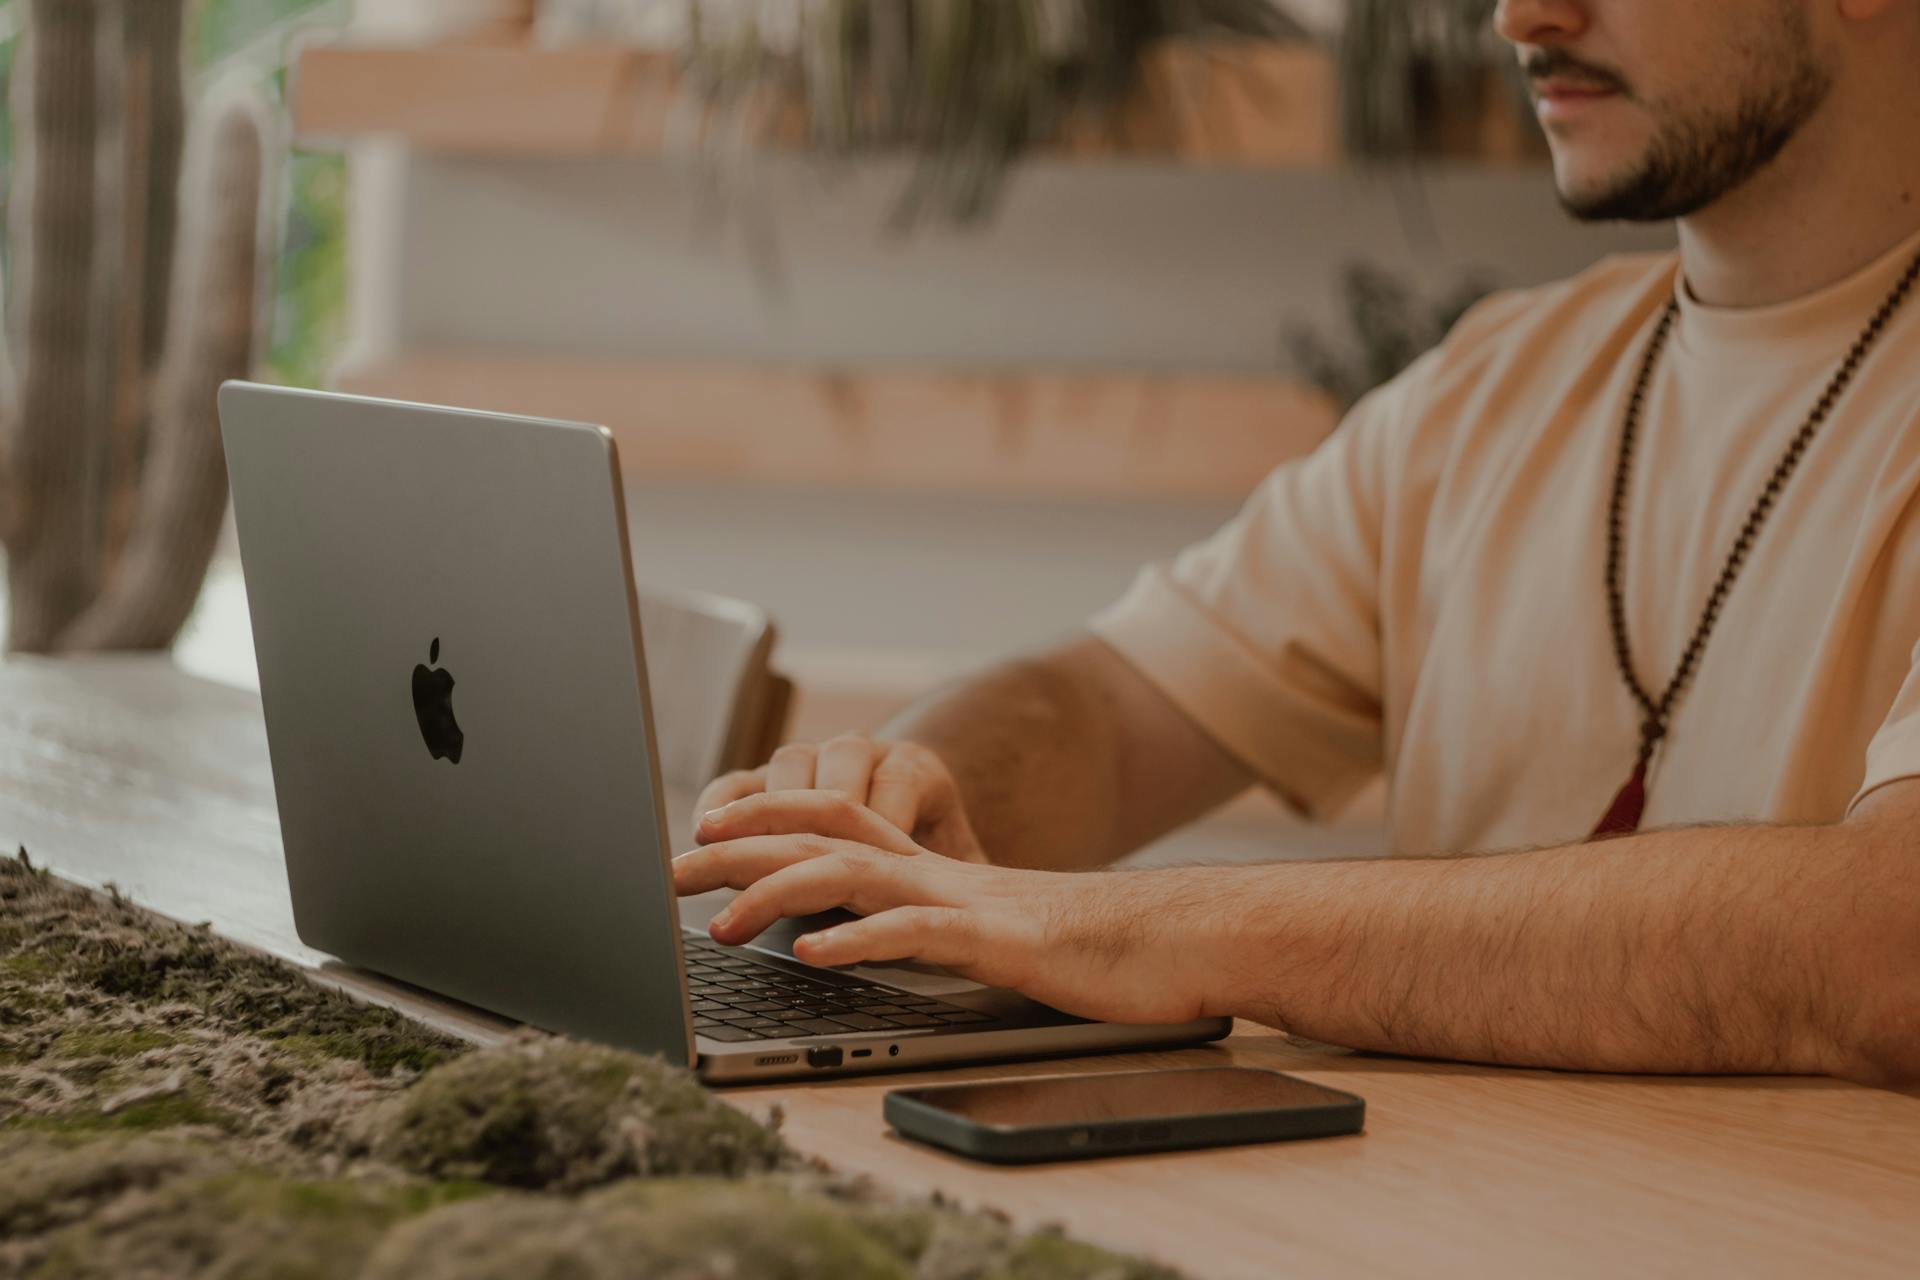 A man working on his laptop | Source: Pexels